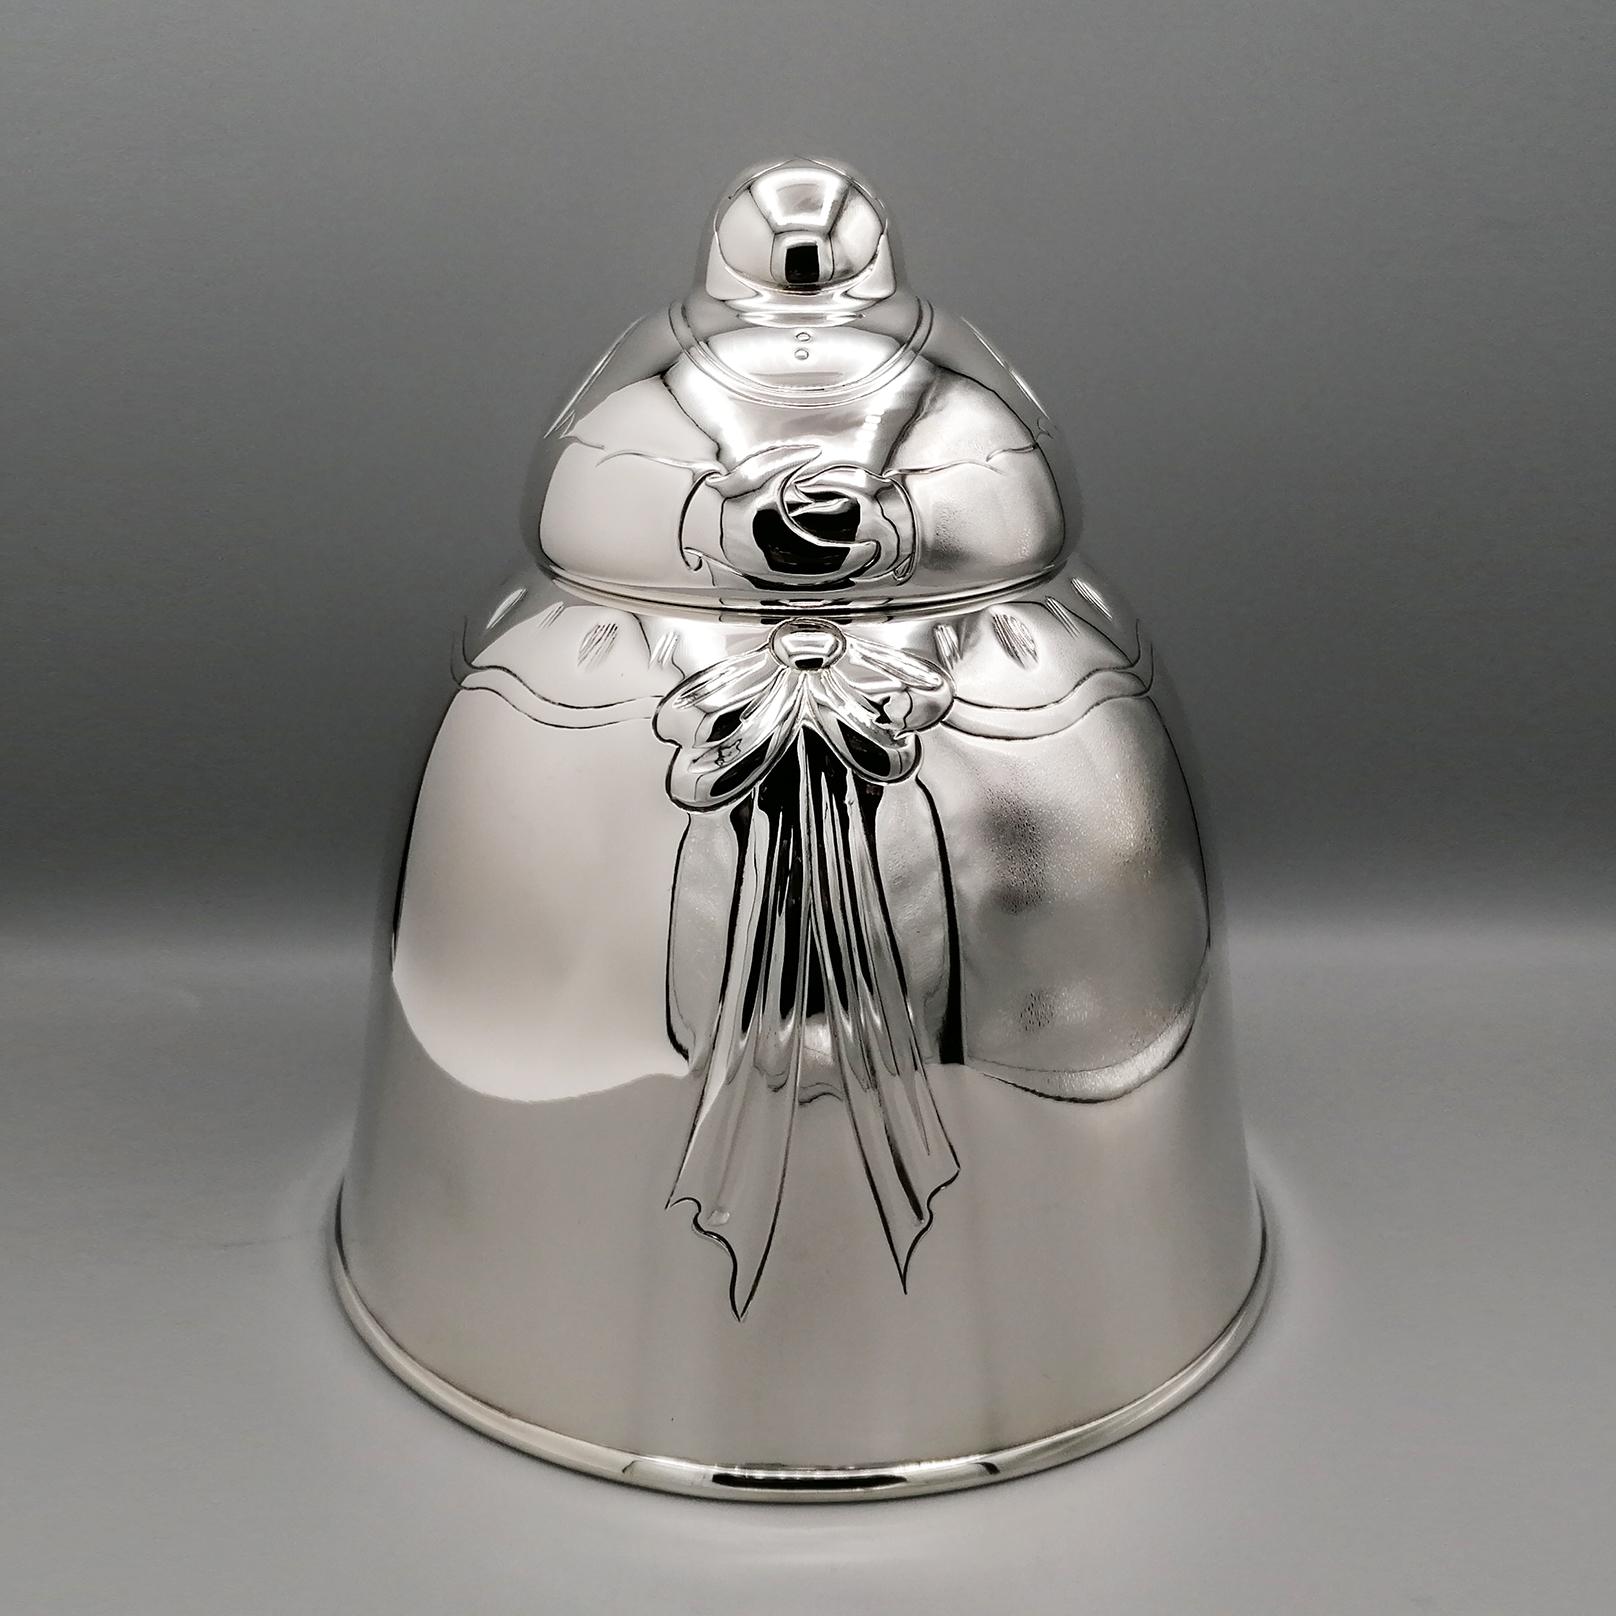 Extravagant and very particular sterling silver biscuit jar depicting a lady reminiscent of the style of 